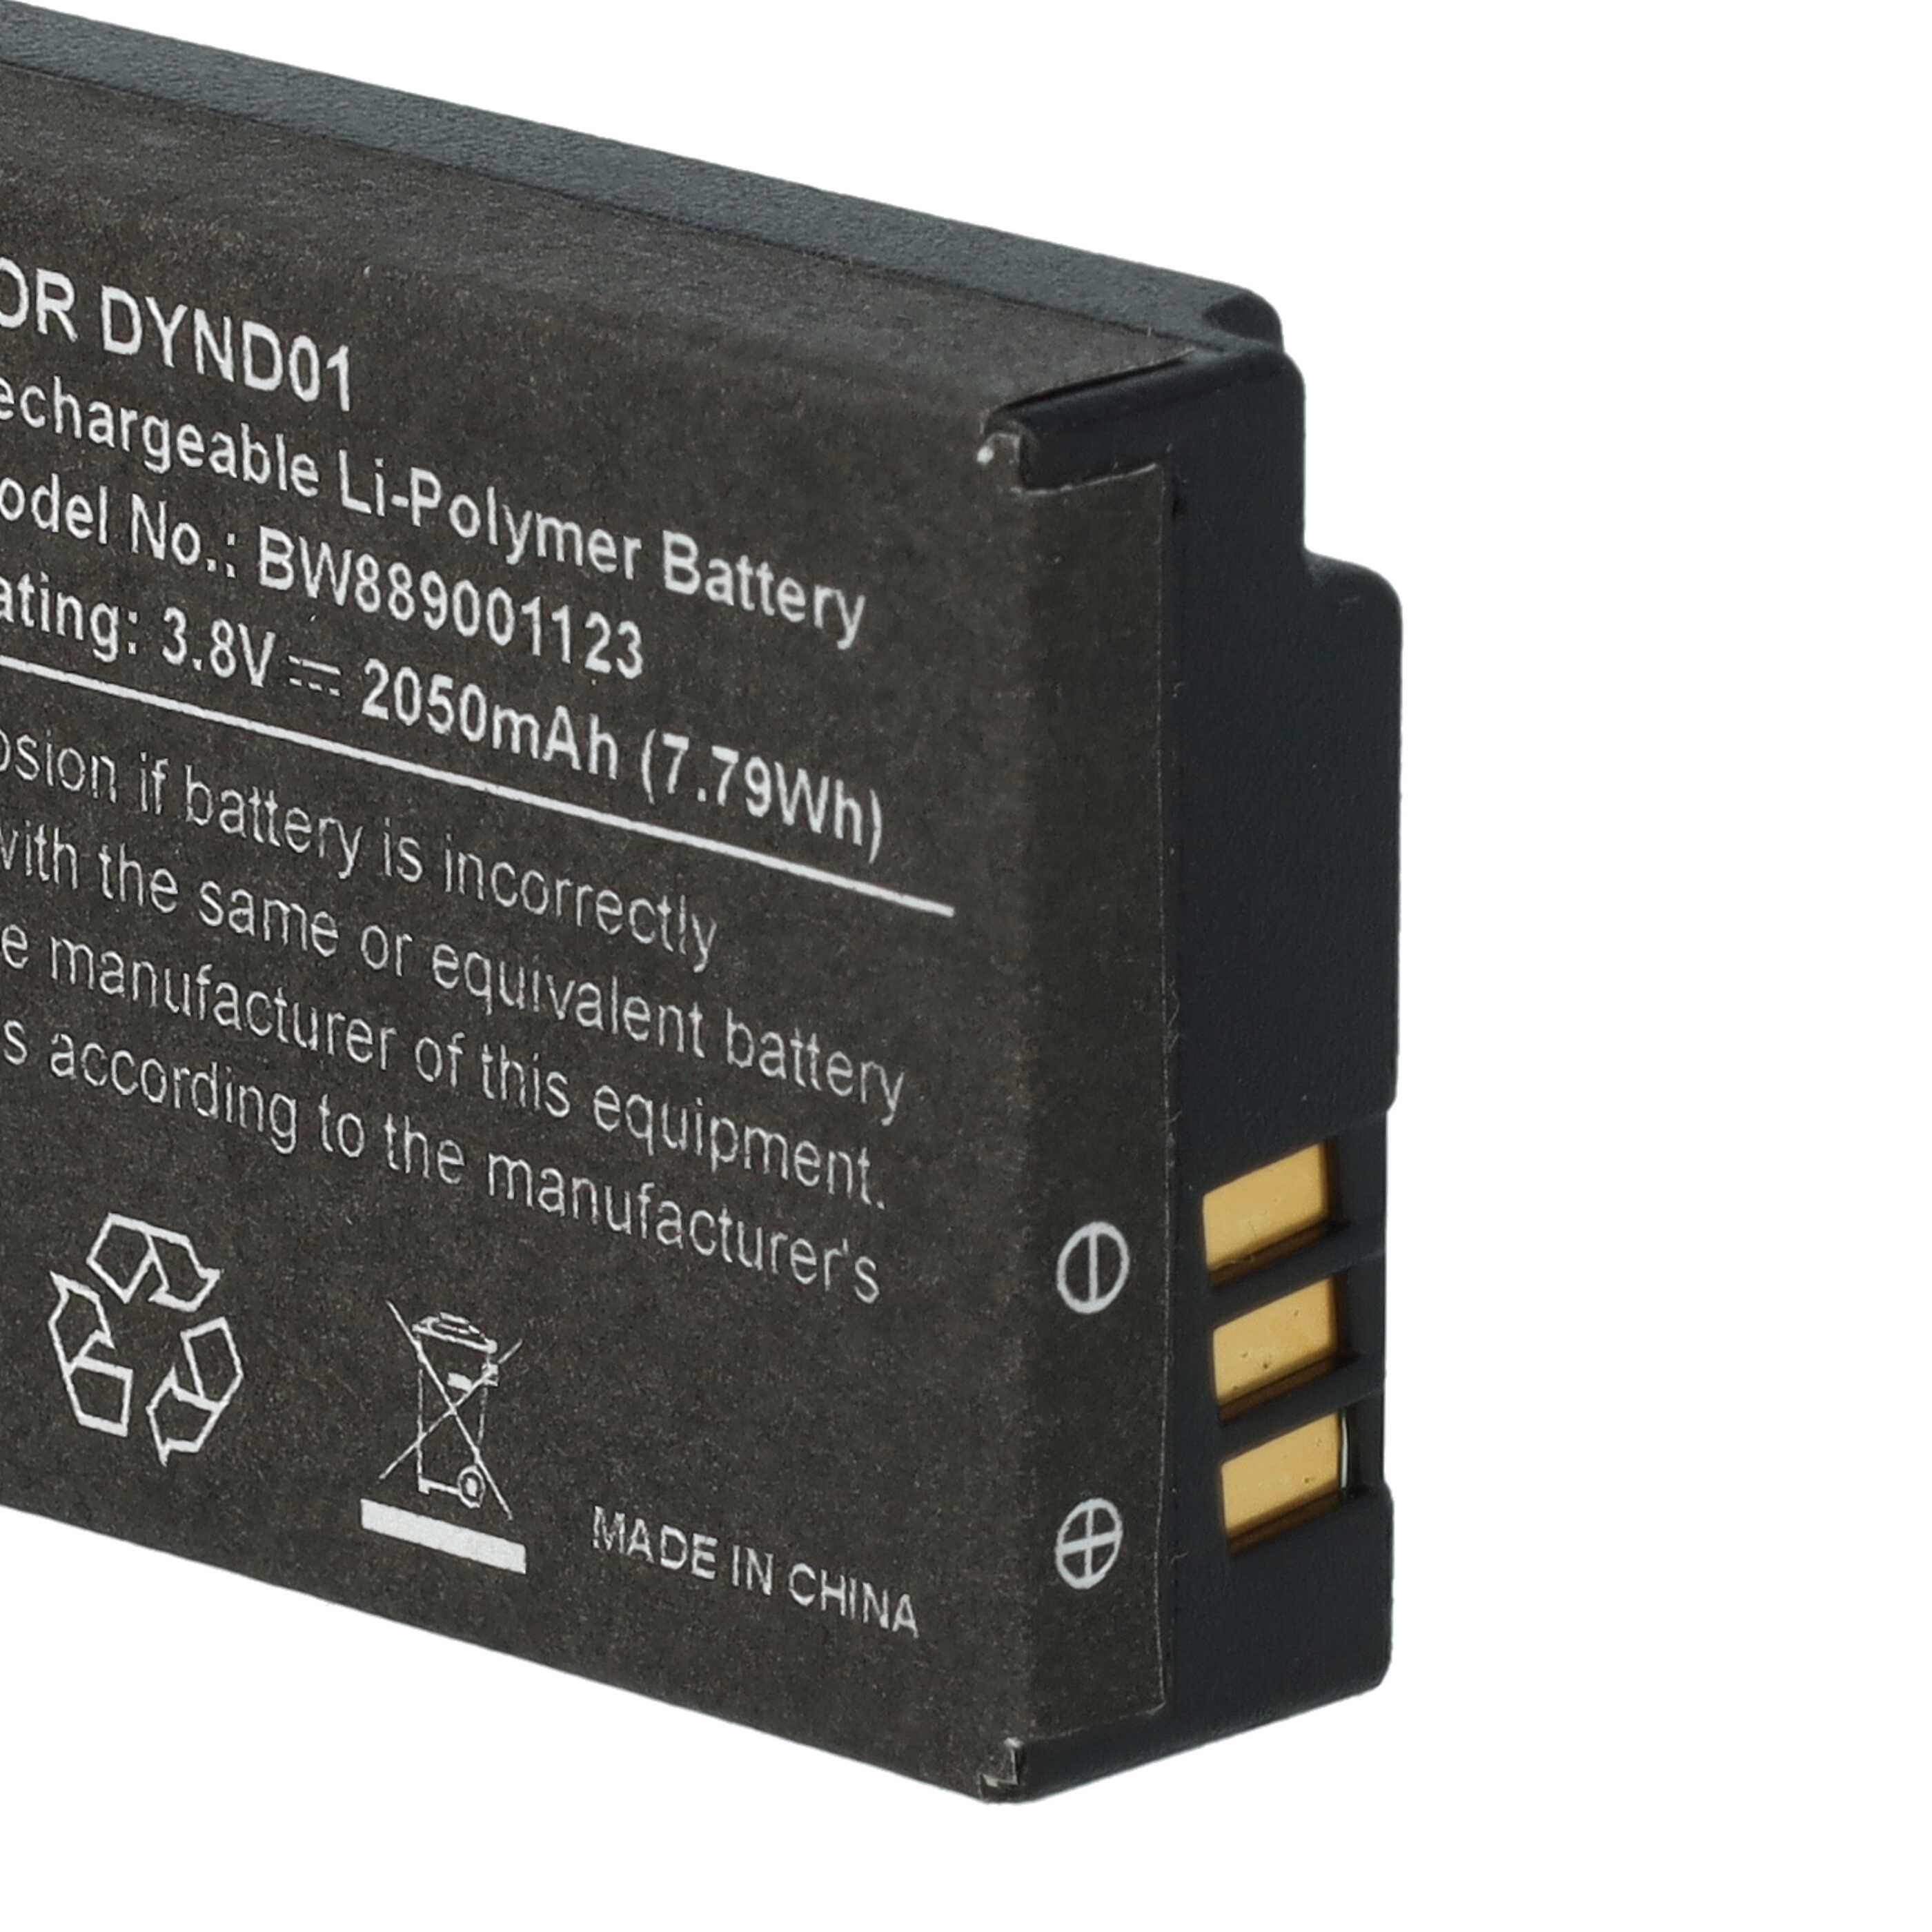  Games Console replaces Microsoft DYND01 for Microsoft - 2050mAh, 3.8V